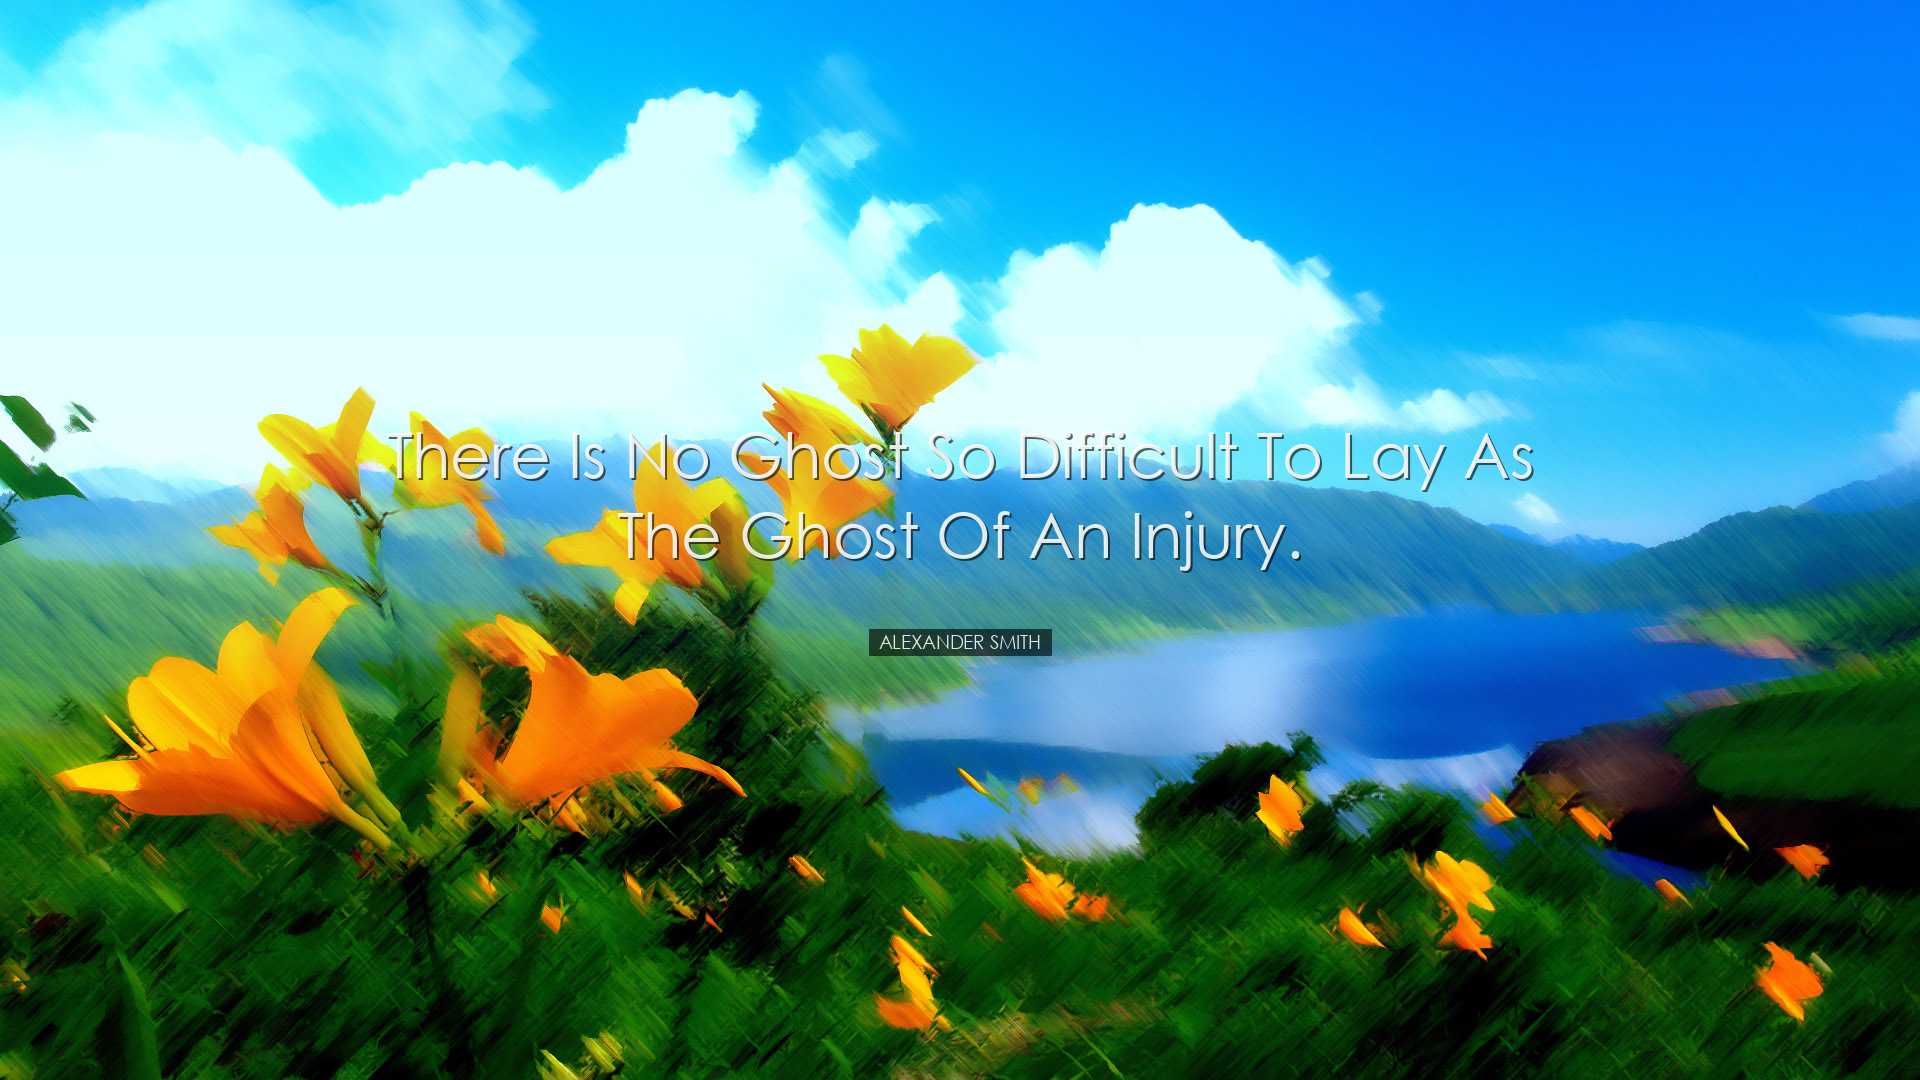 There is no ghost so difficult to lay as the ghost of an injury. -